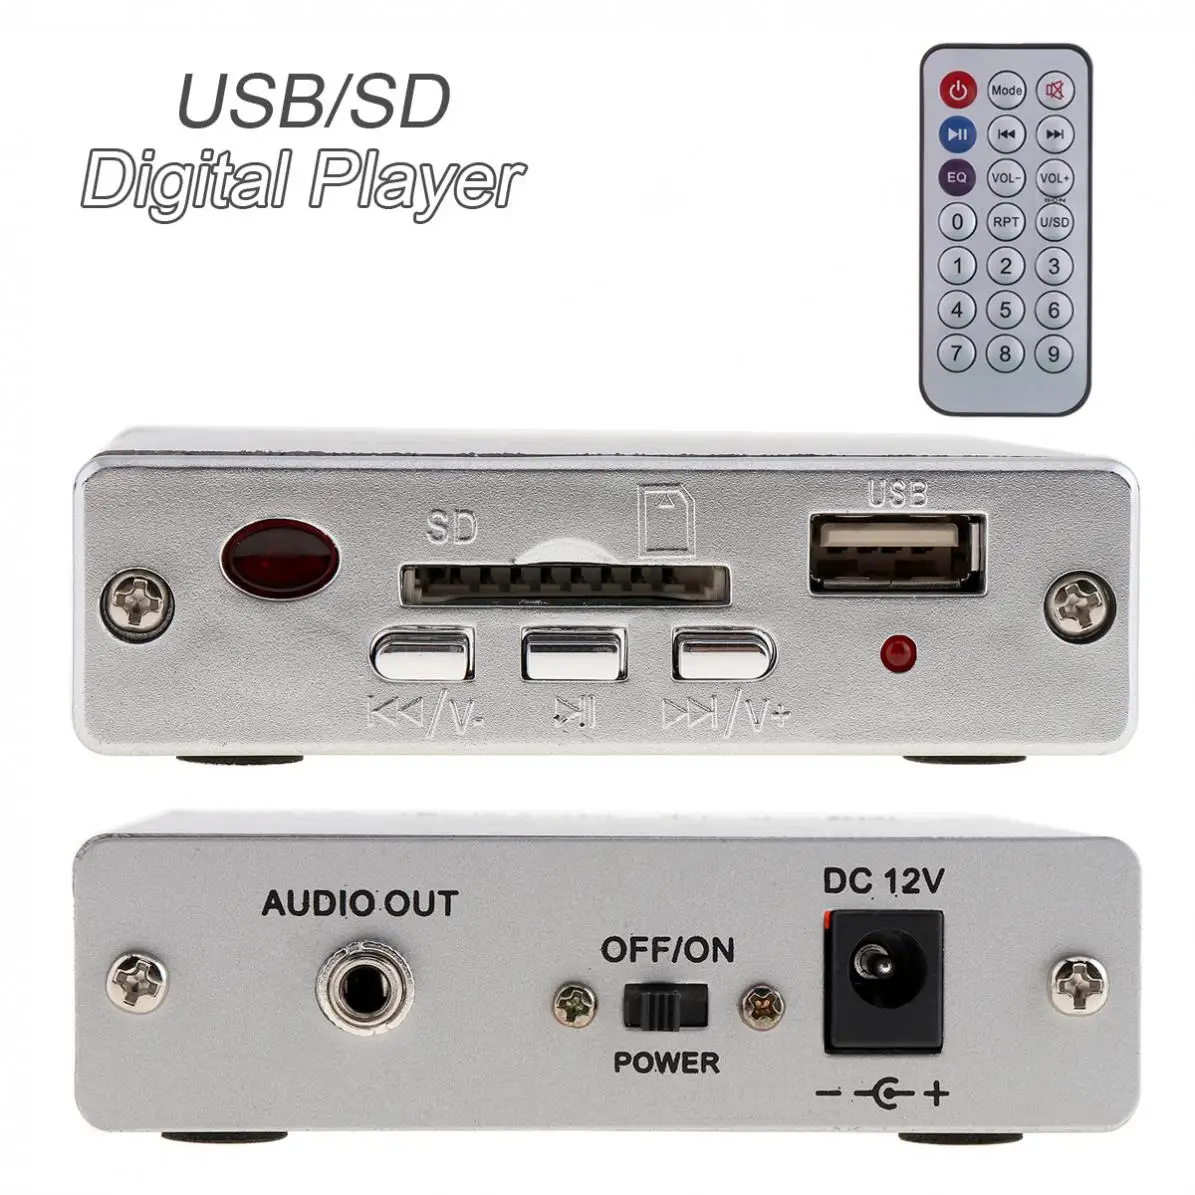 DC12V Car Power Amplifier Audio Player Reader 3-Electronic Keypad Control with Remote Control Support MP3 SD USB